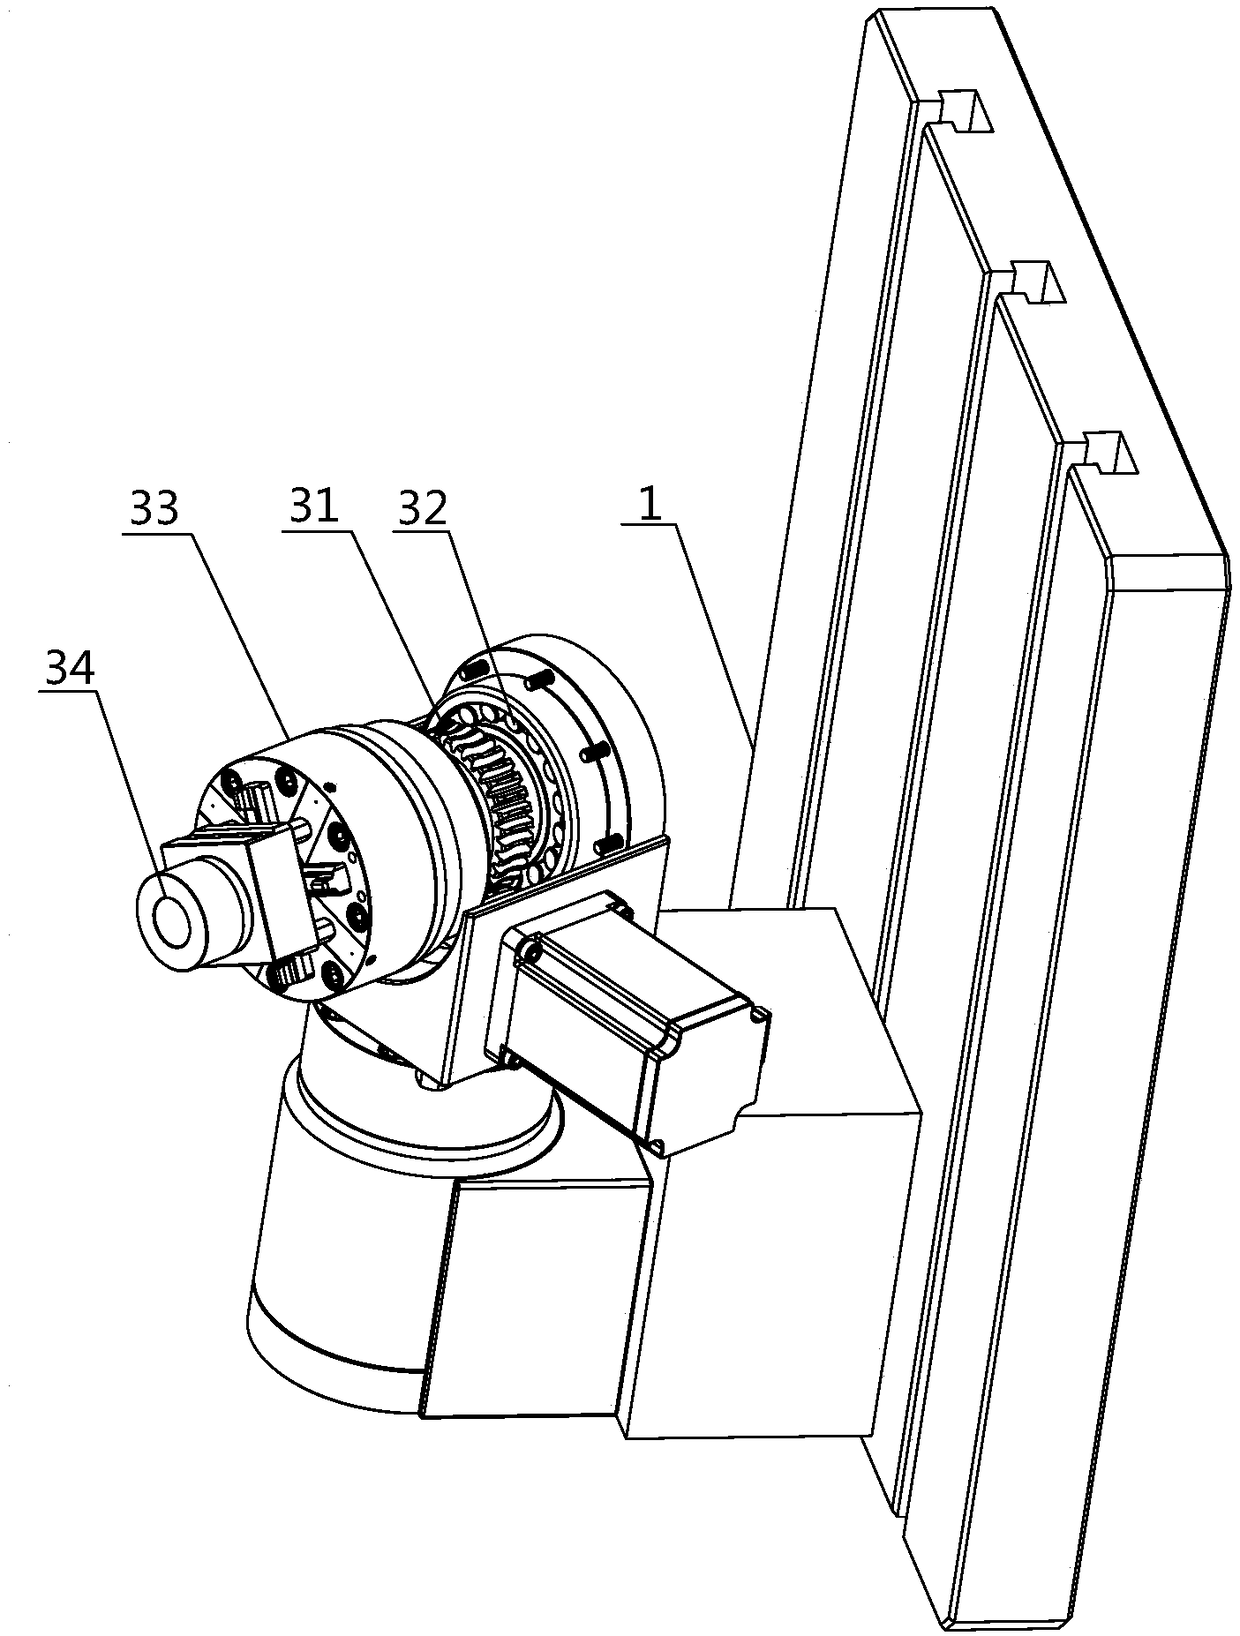 Motor drive multi-shaft combined mechanical arm system